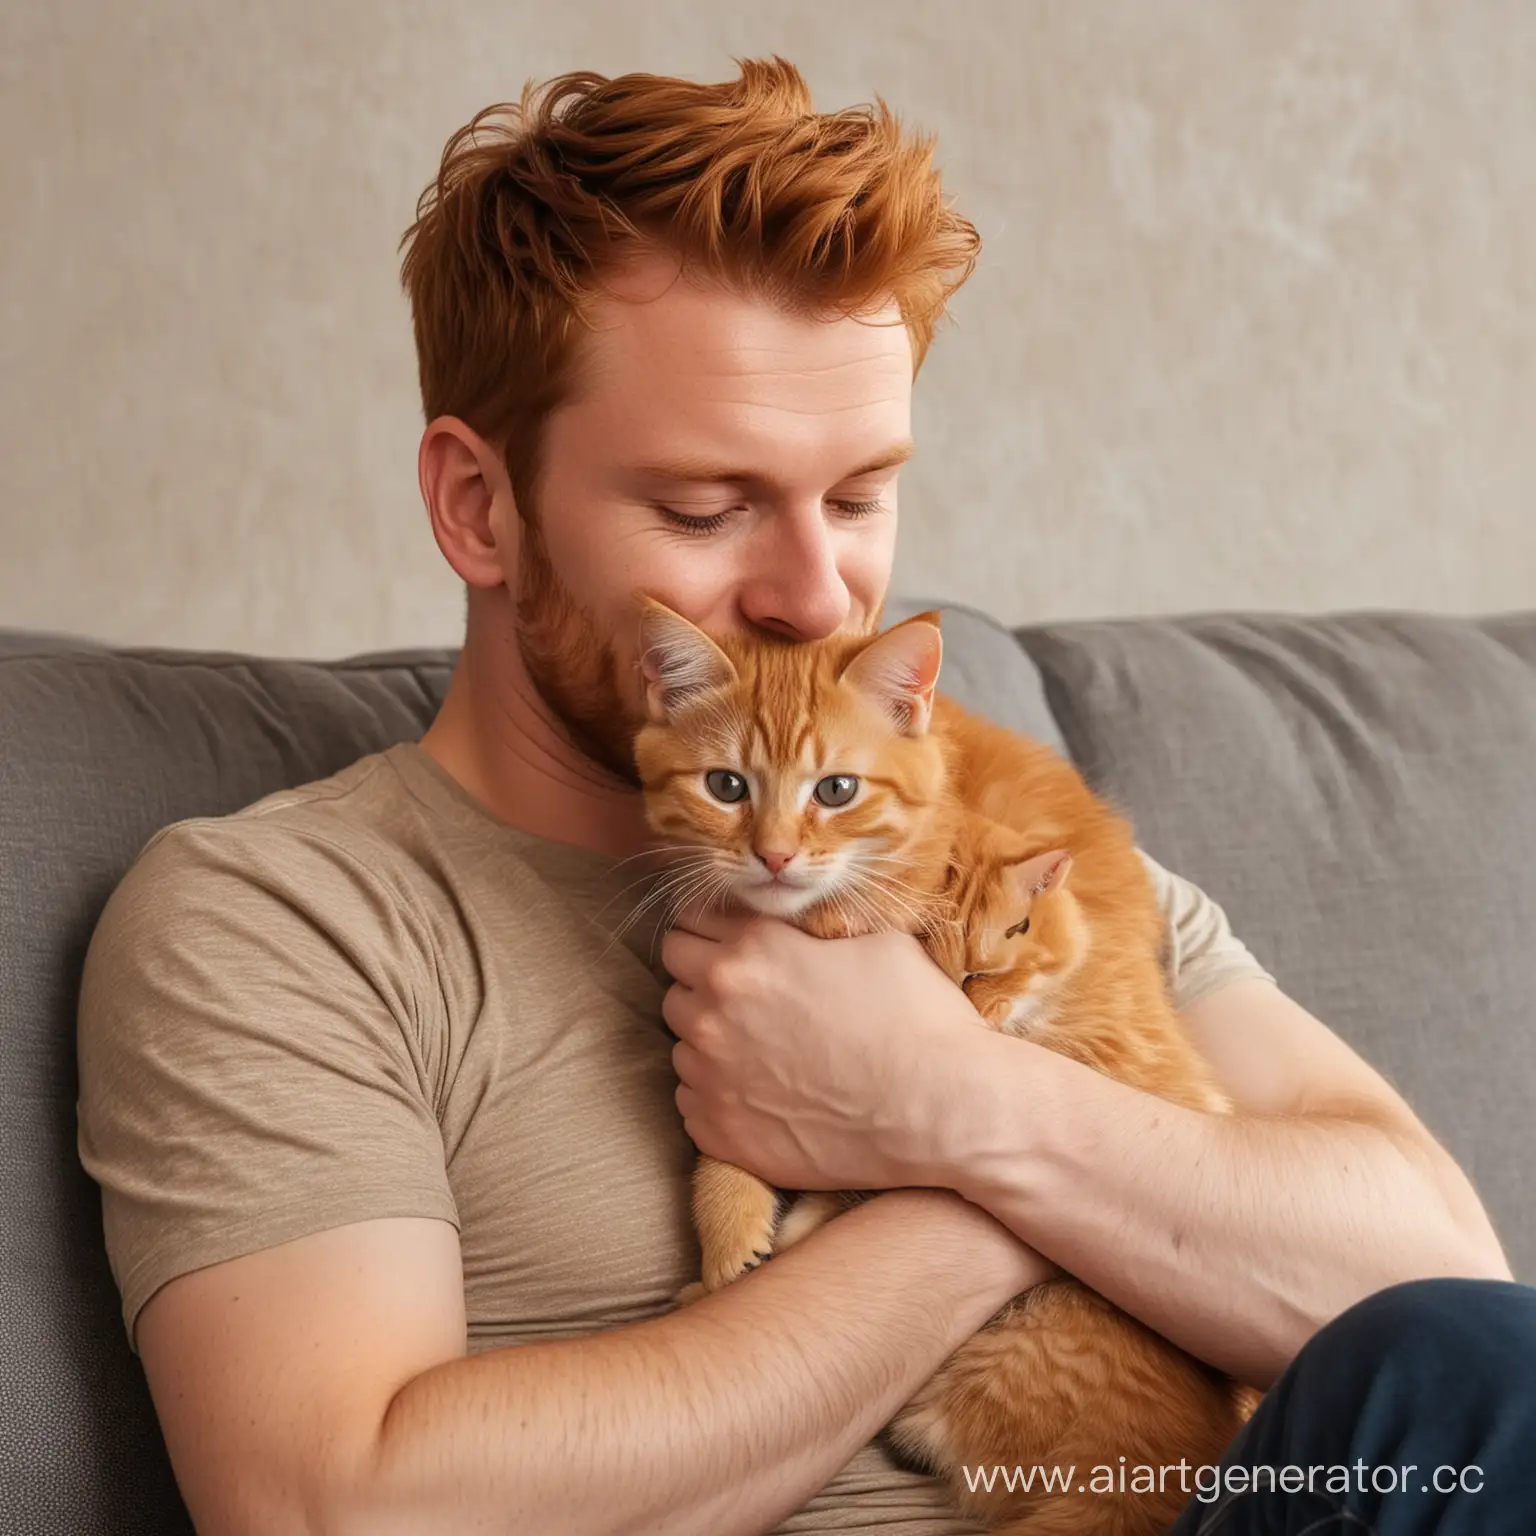 Man-Sitting-on-Couch-Hugging-Young-Ginger-Kitten